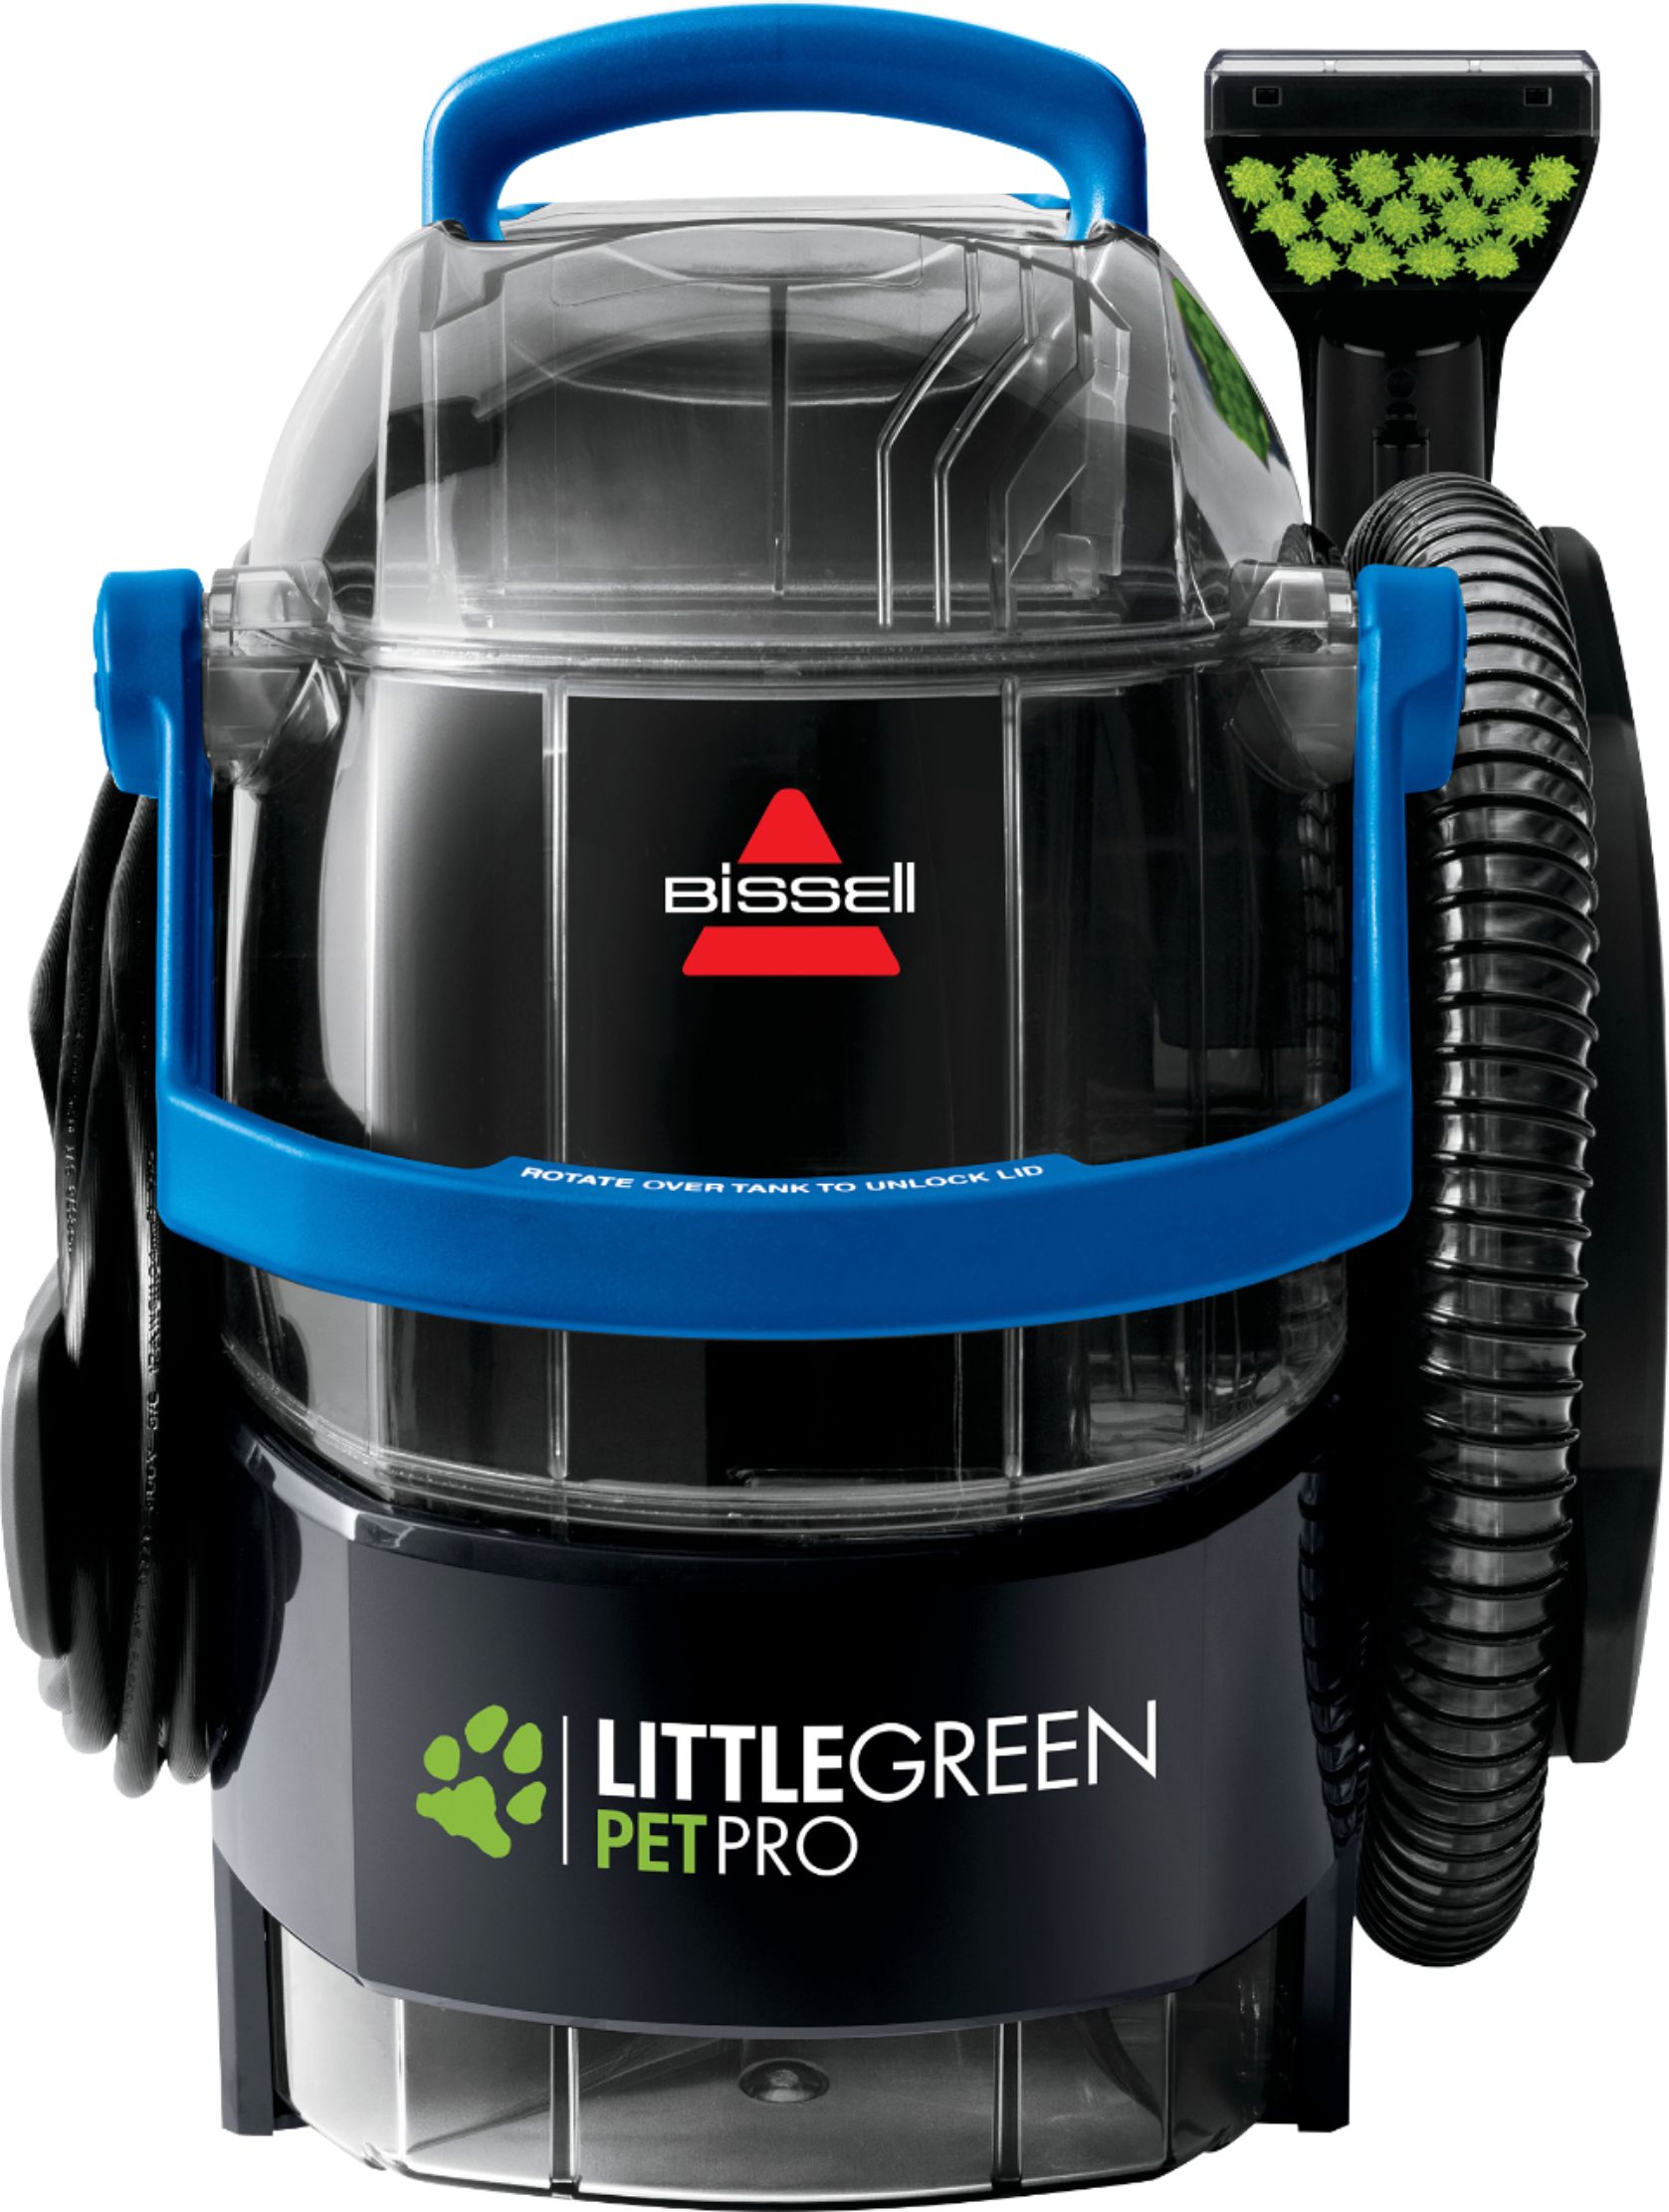 Bissell Little Green ProHeat vs Bissell Little Green COMPARISON